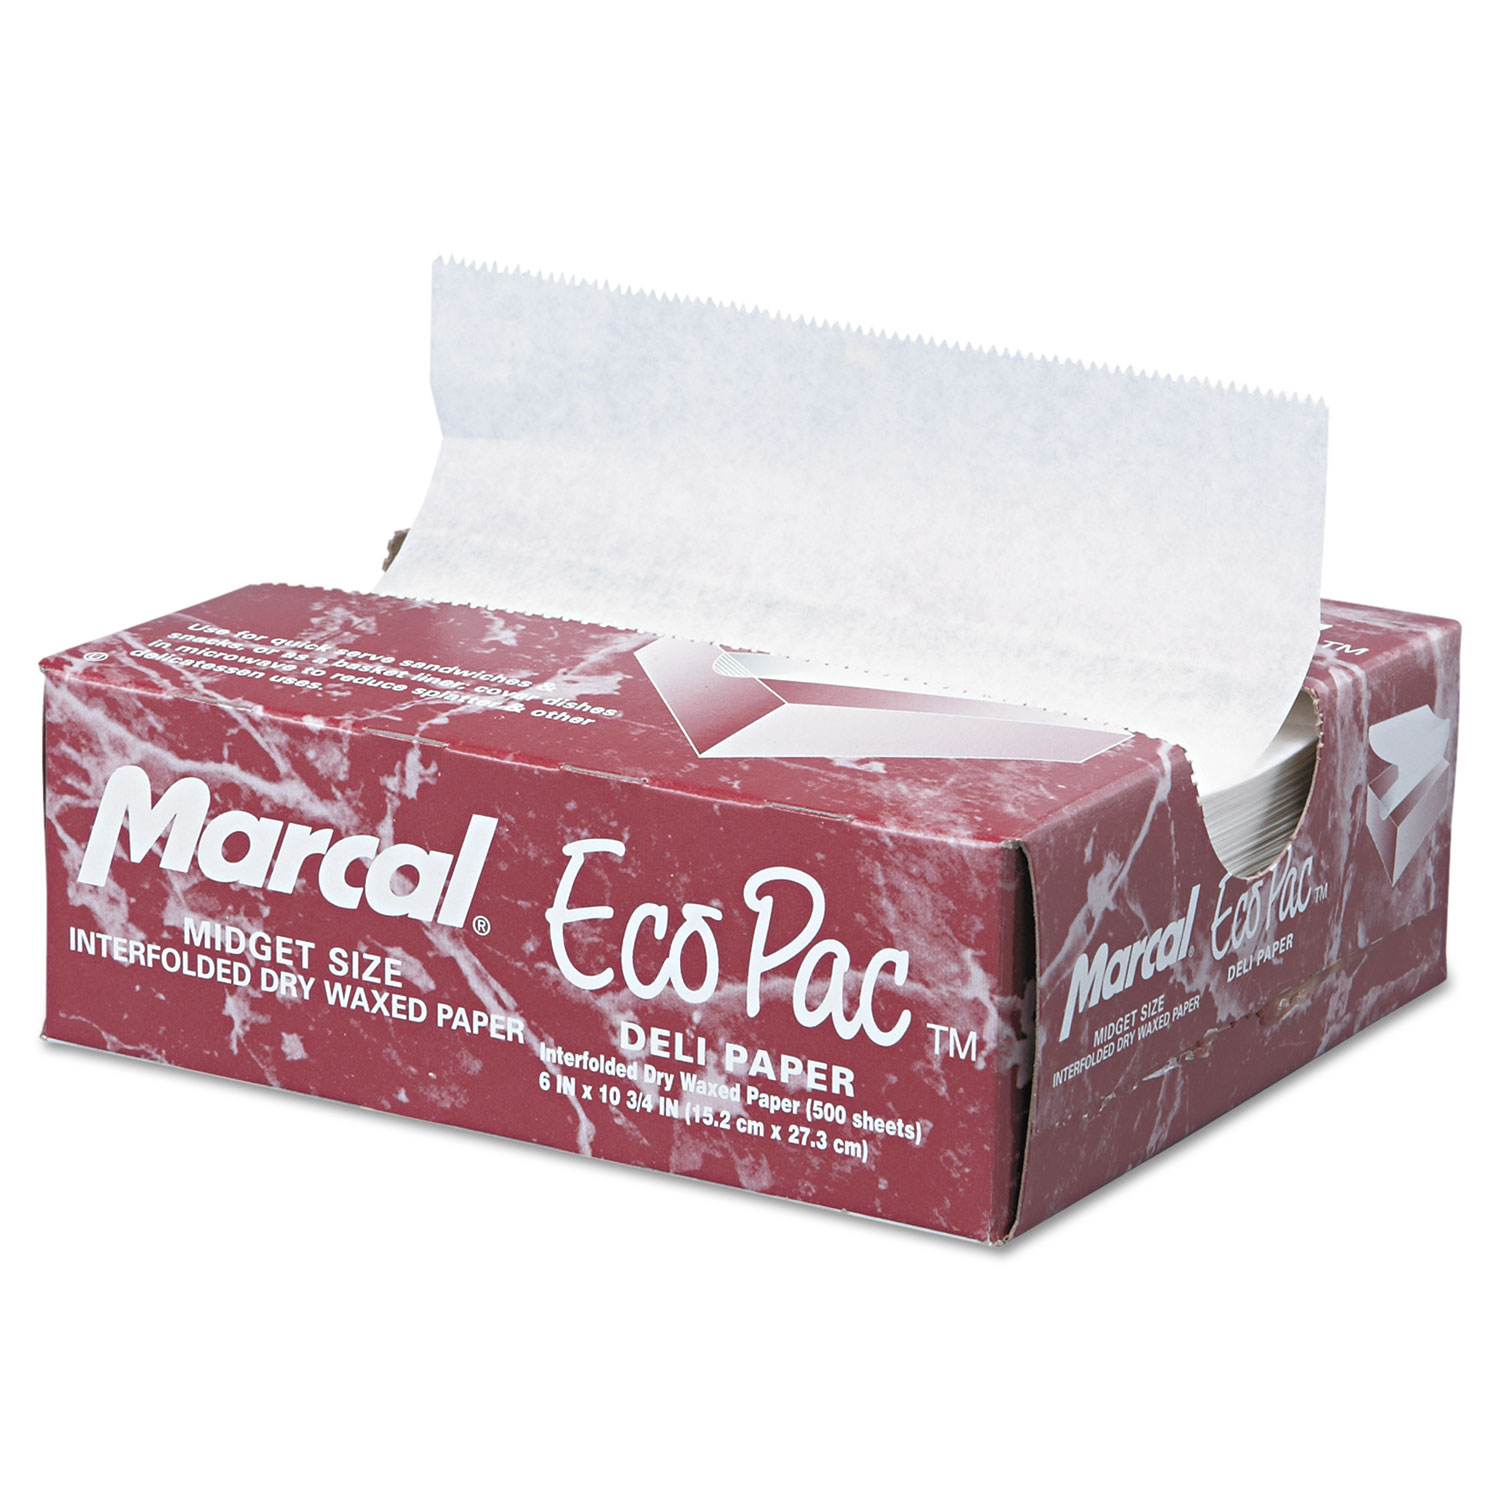  Marcal MCD 5290 Eco-Pac Interfolded Dry Wax Paper, 6 x 10 3/4, White, 500/Pack, 12 Packs/Carton (MCD5290) 